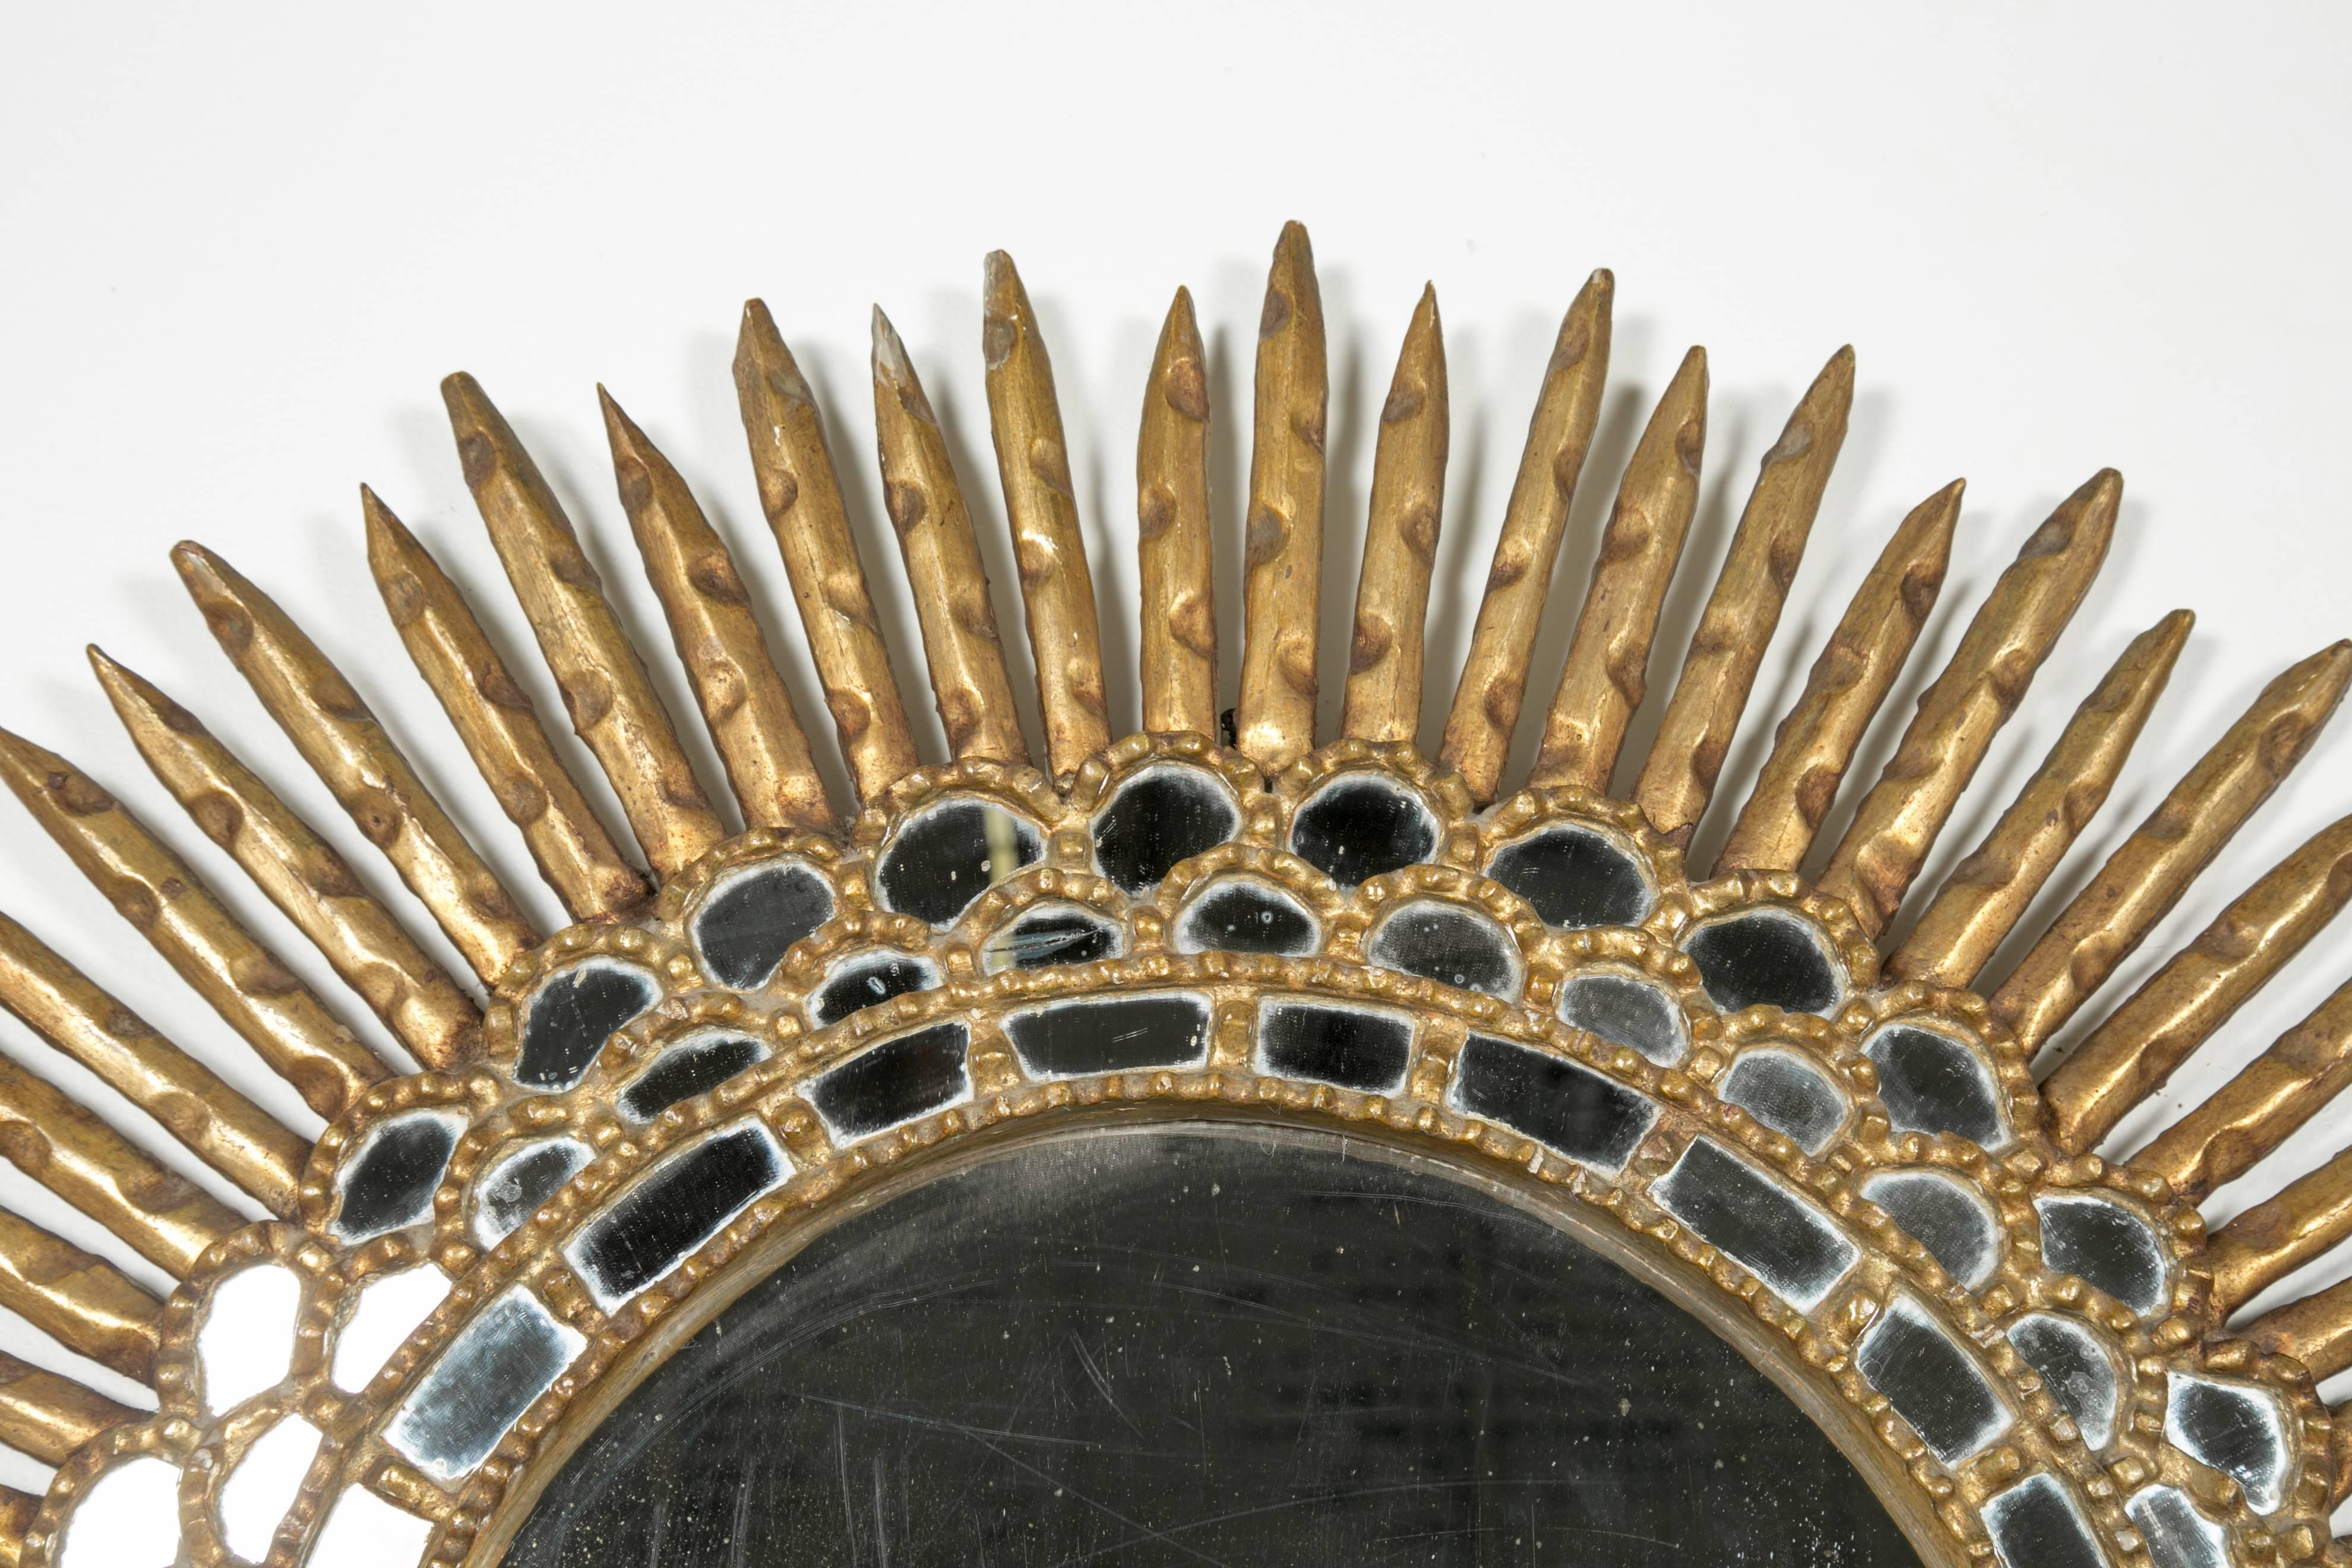 A Spanish gilt and carved wood sunburst mirror with mirror insets, circa early 1900s. All original.

Dimensions:
Total size is 34.5 inches diameter
Mirror is 14.5